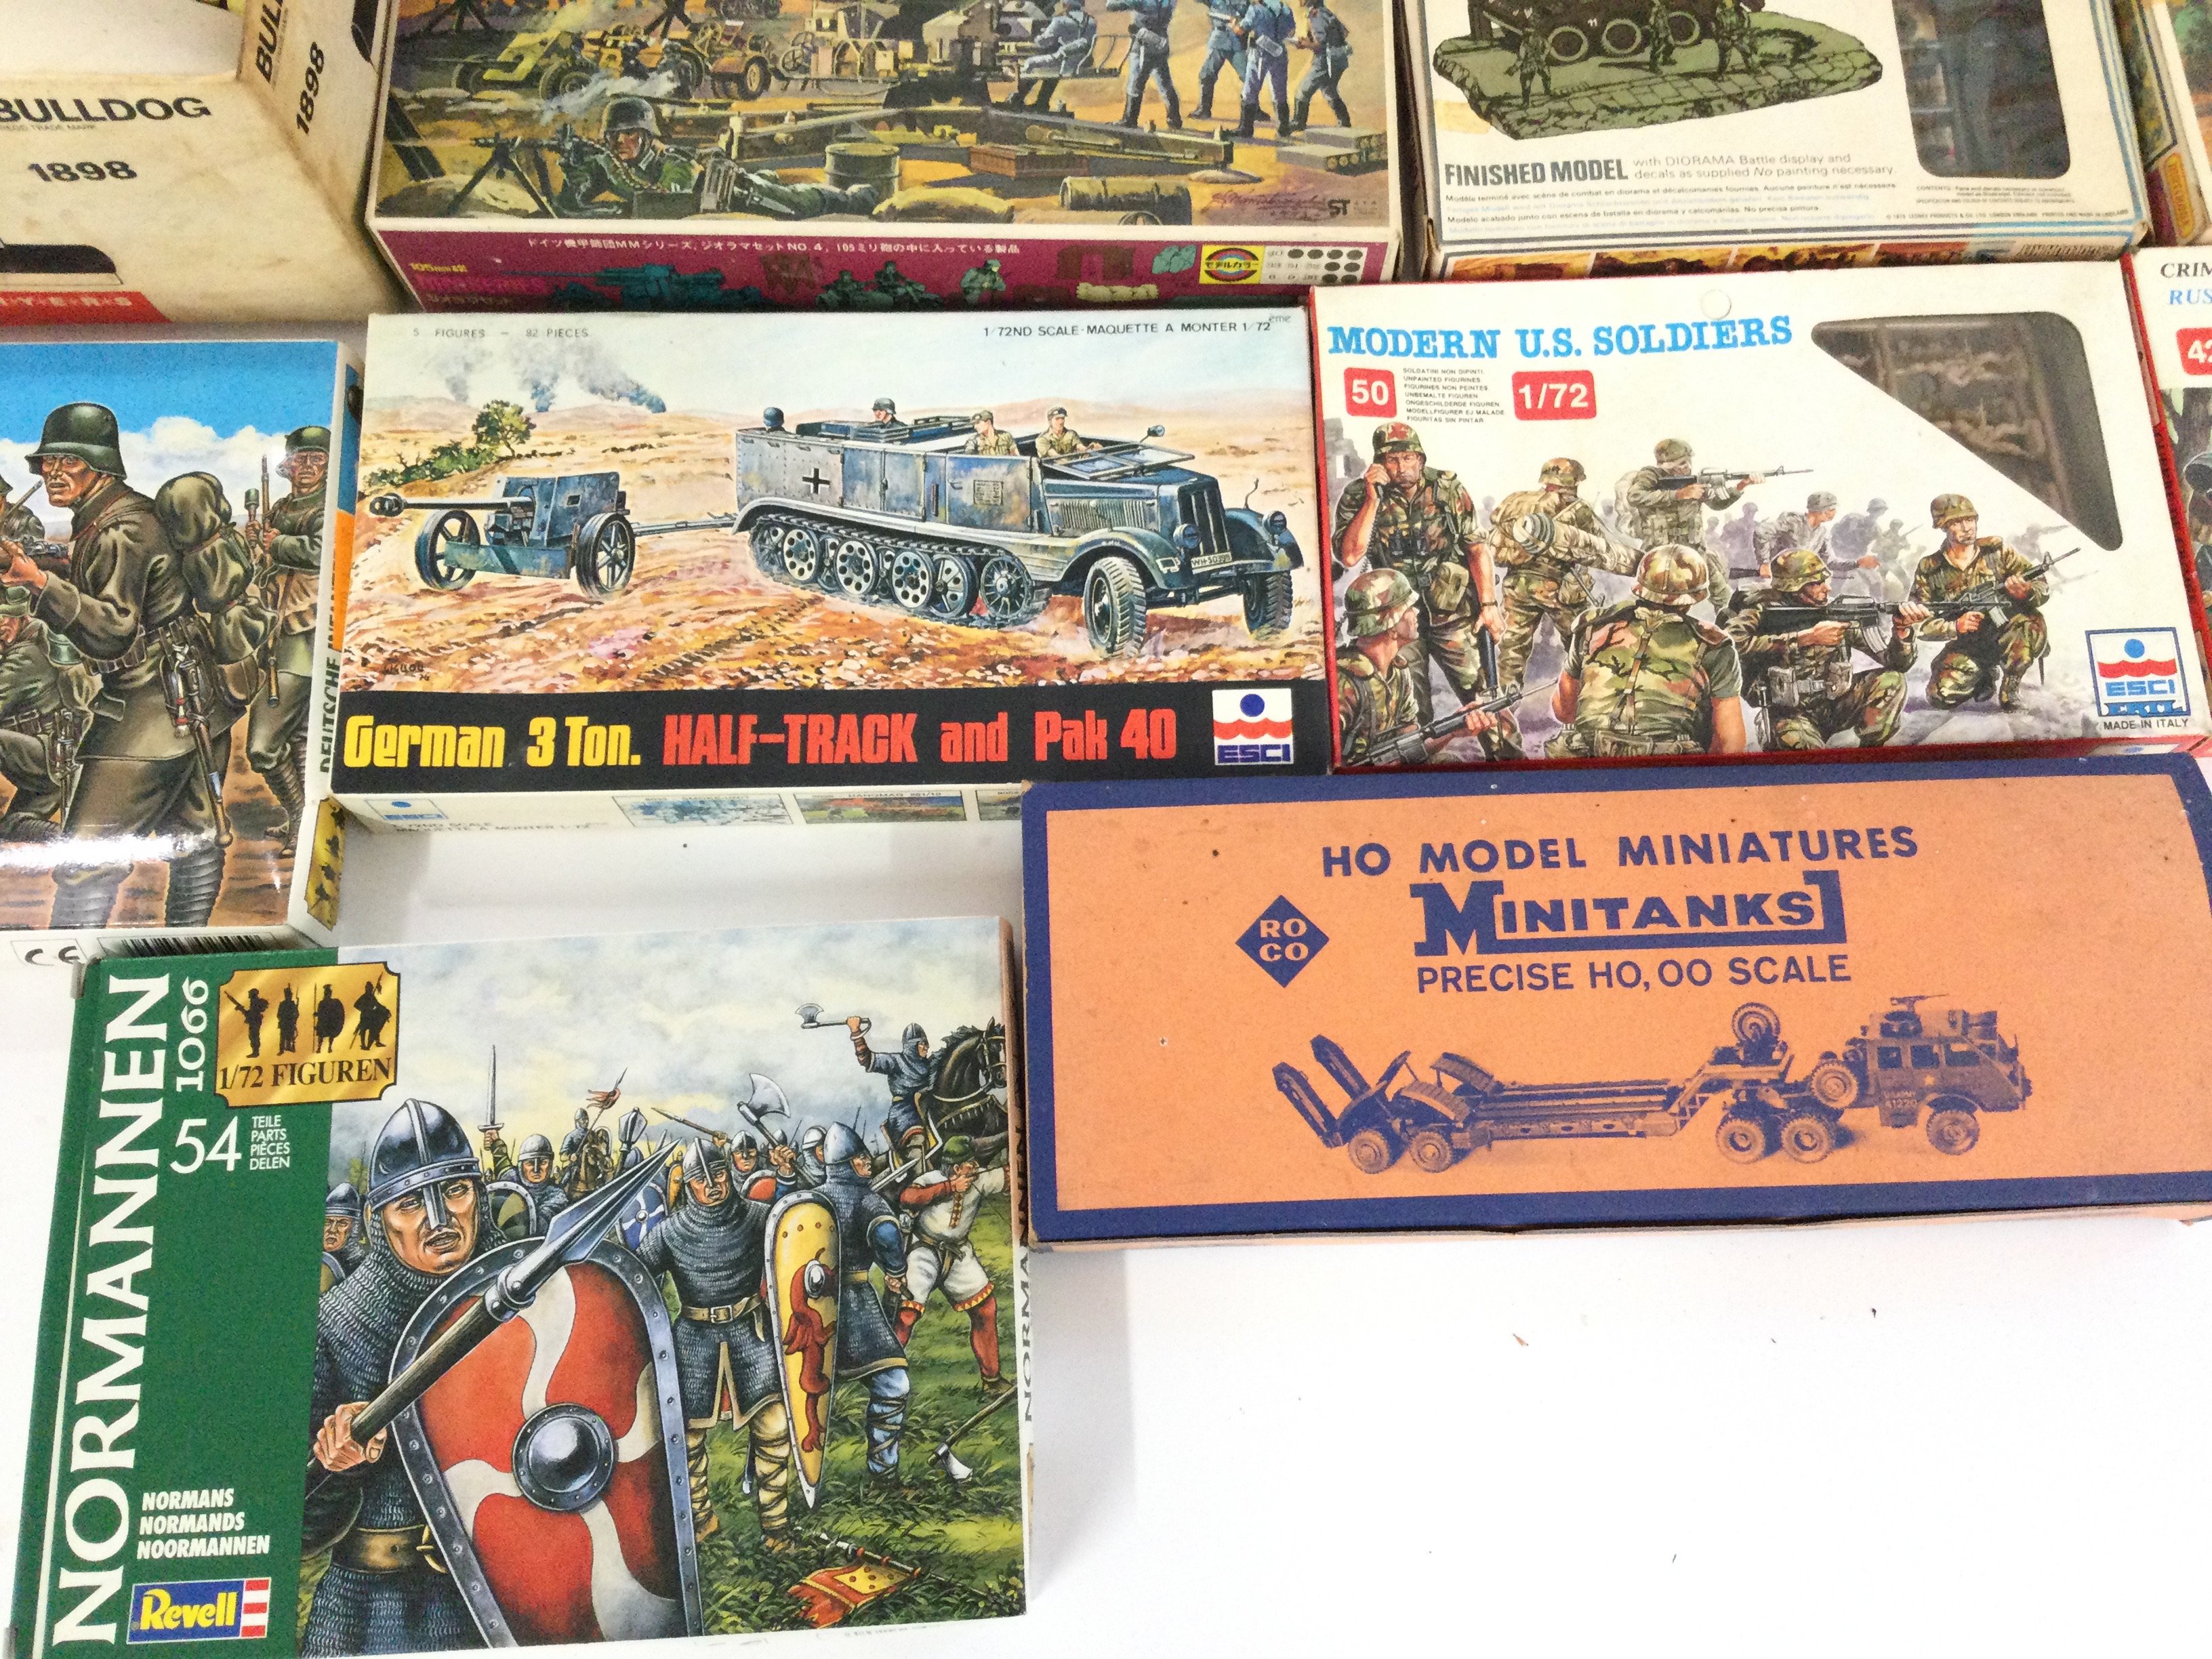 A Collection of Boxed Model Kits including Airfix. Revell. Roco. And a Collection of Loose Figures. - Image 4 of 5